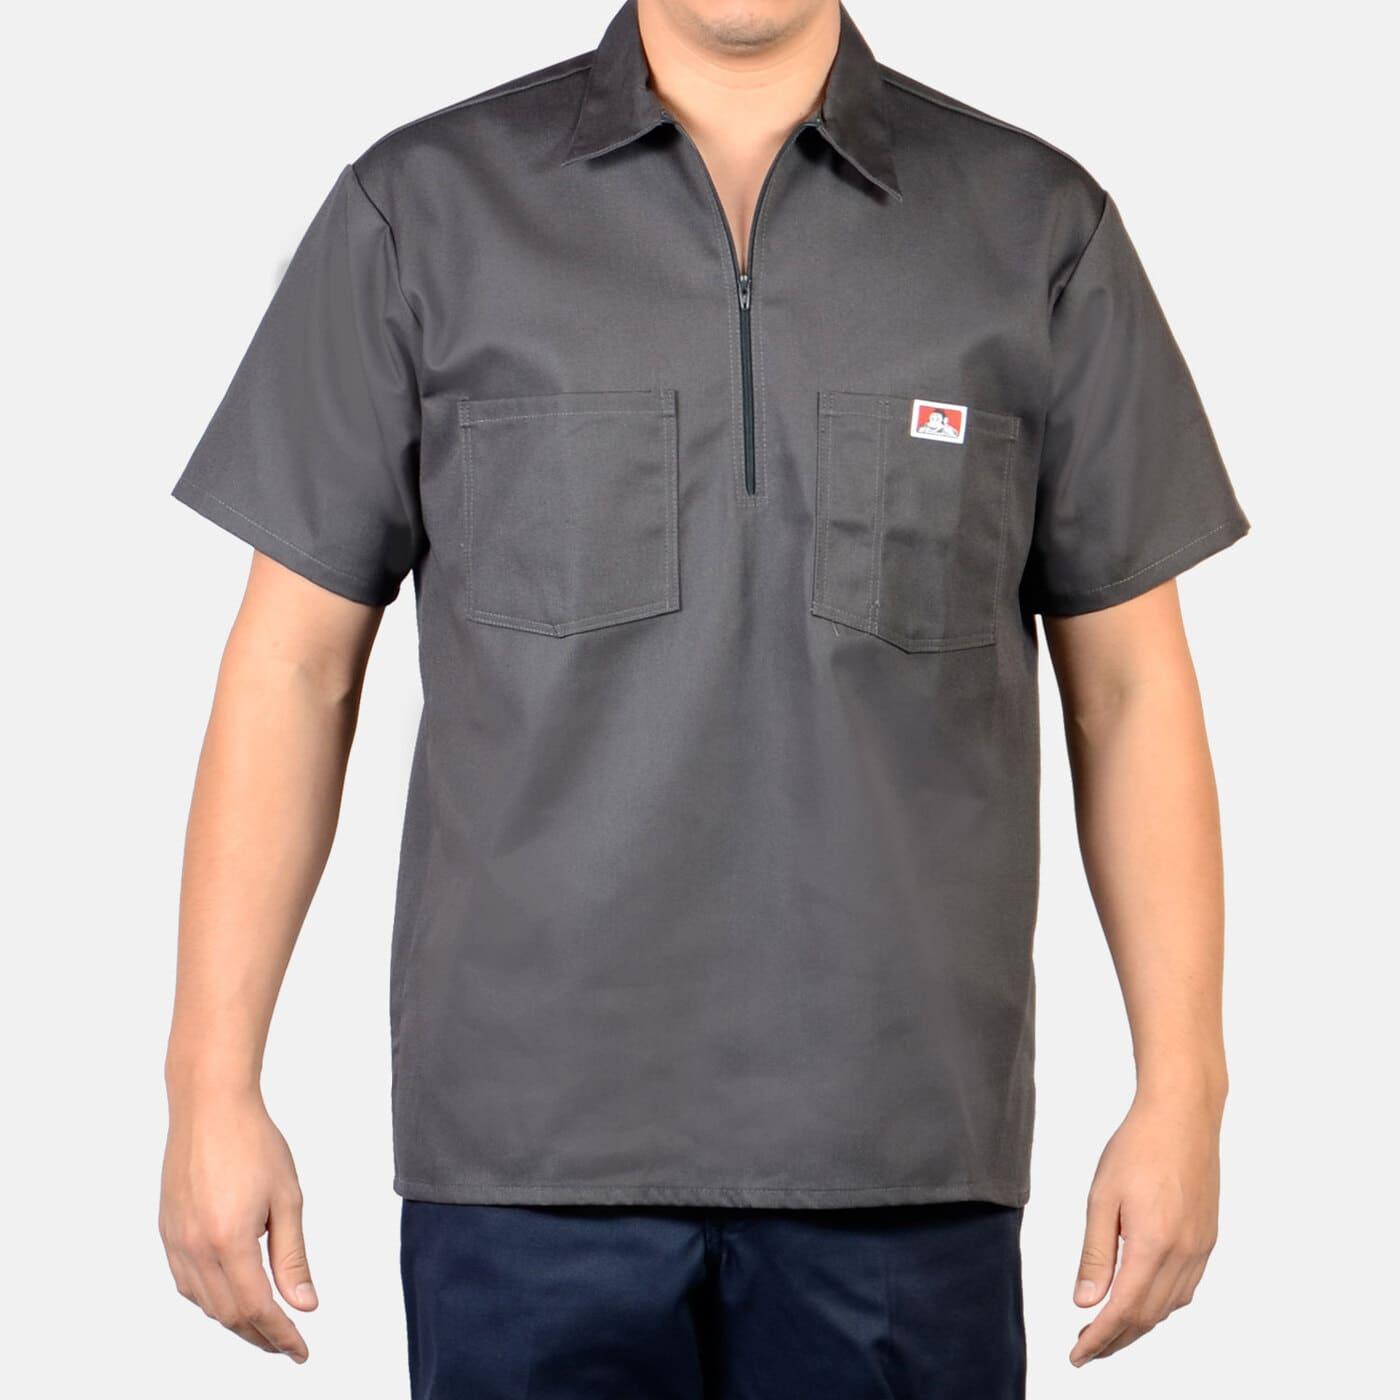 1/2 Zipper Short Sleeve - Charcoal - Purpose-Built / Home of the Trades